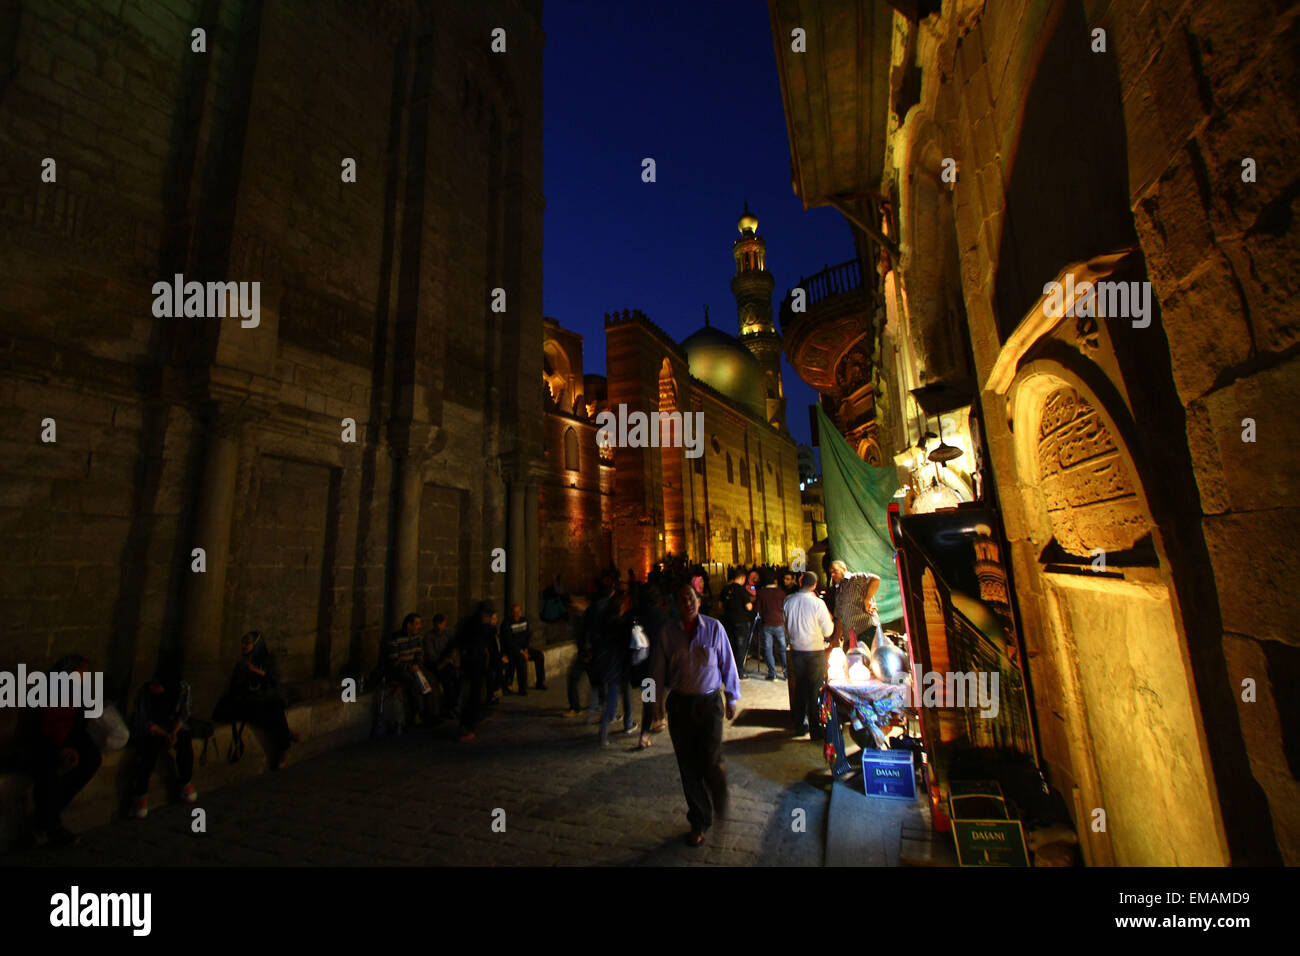 Cairo, Egypt. 18th Apr, 2015. Egyptians visit the Al-Moez Street, which is one of the oldest streets in Cairo, as celebrating the World Heritage Day, in Egypt, on April 18, 2015. © Ahmed Gomaa/Xinhua/Alamy Live News Stock Photo